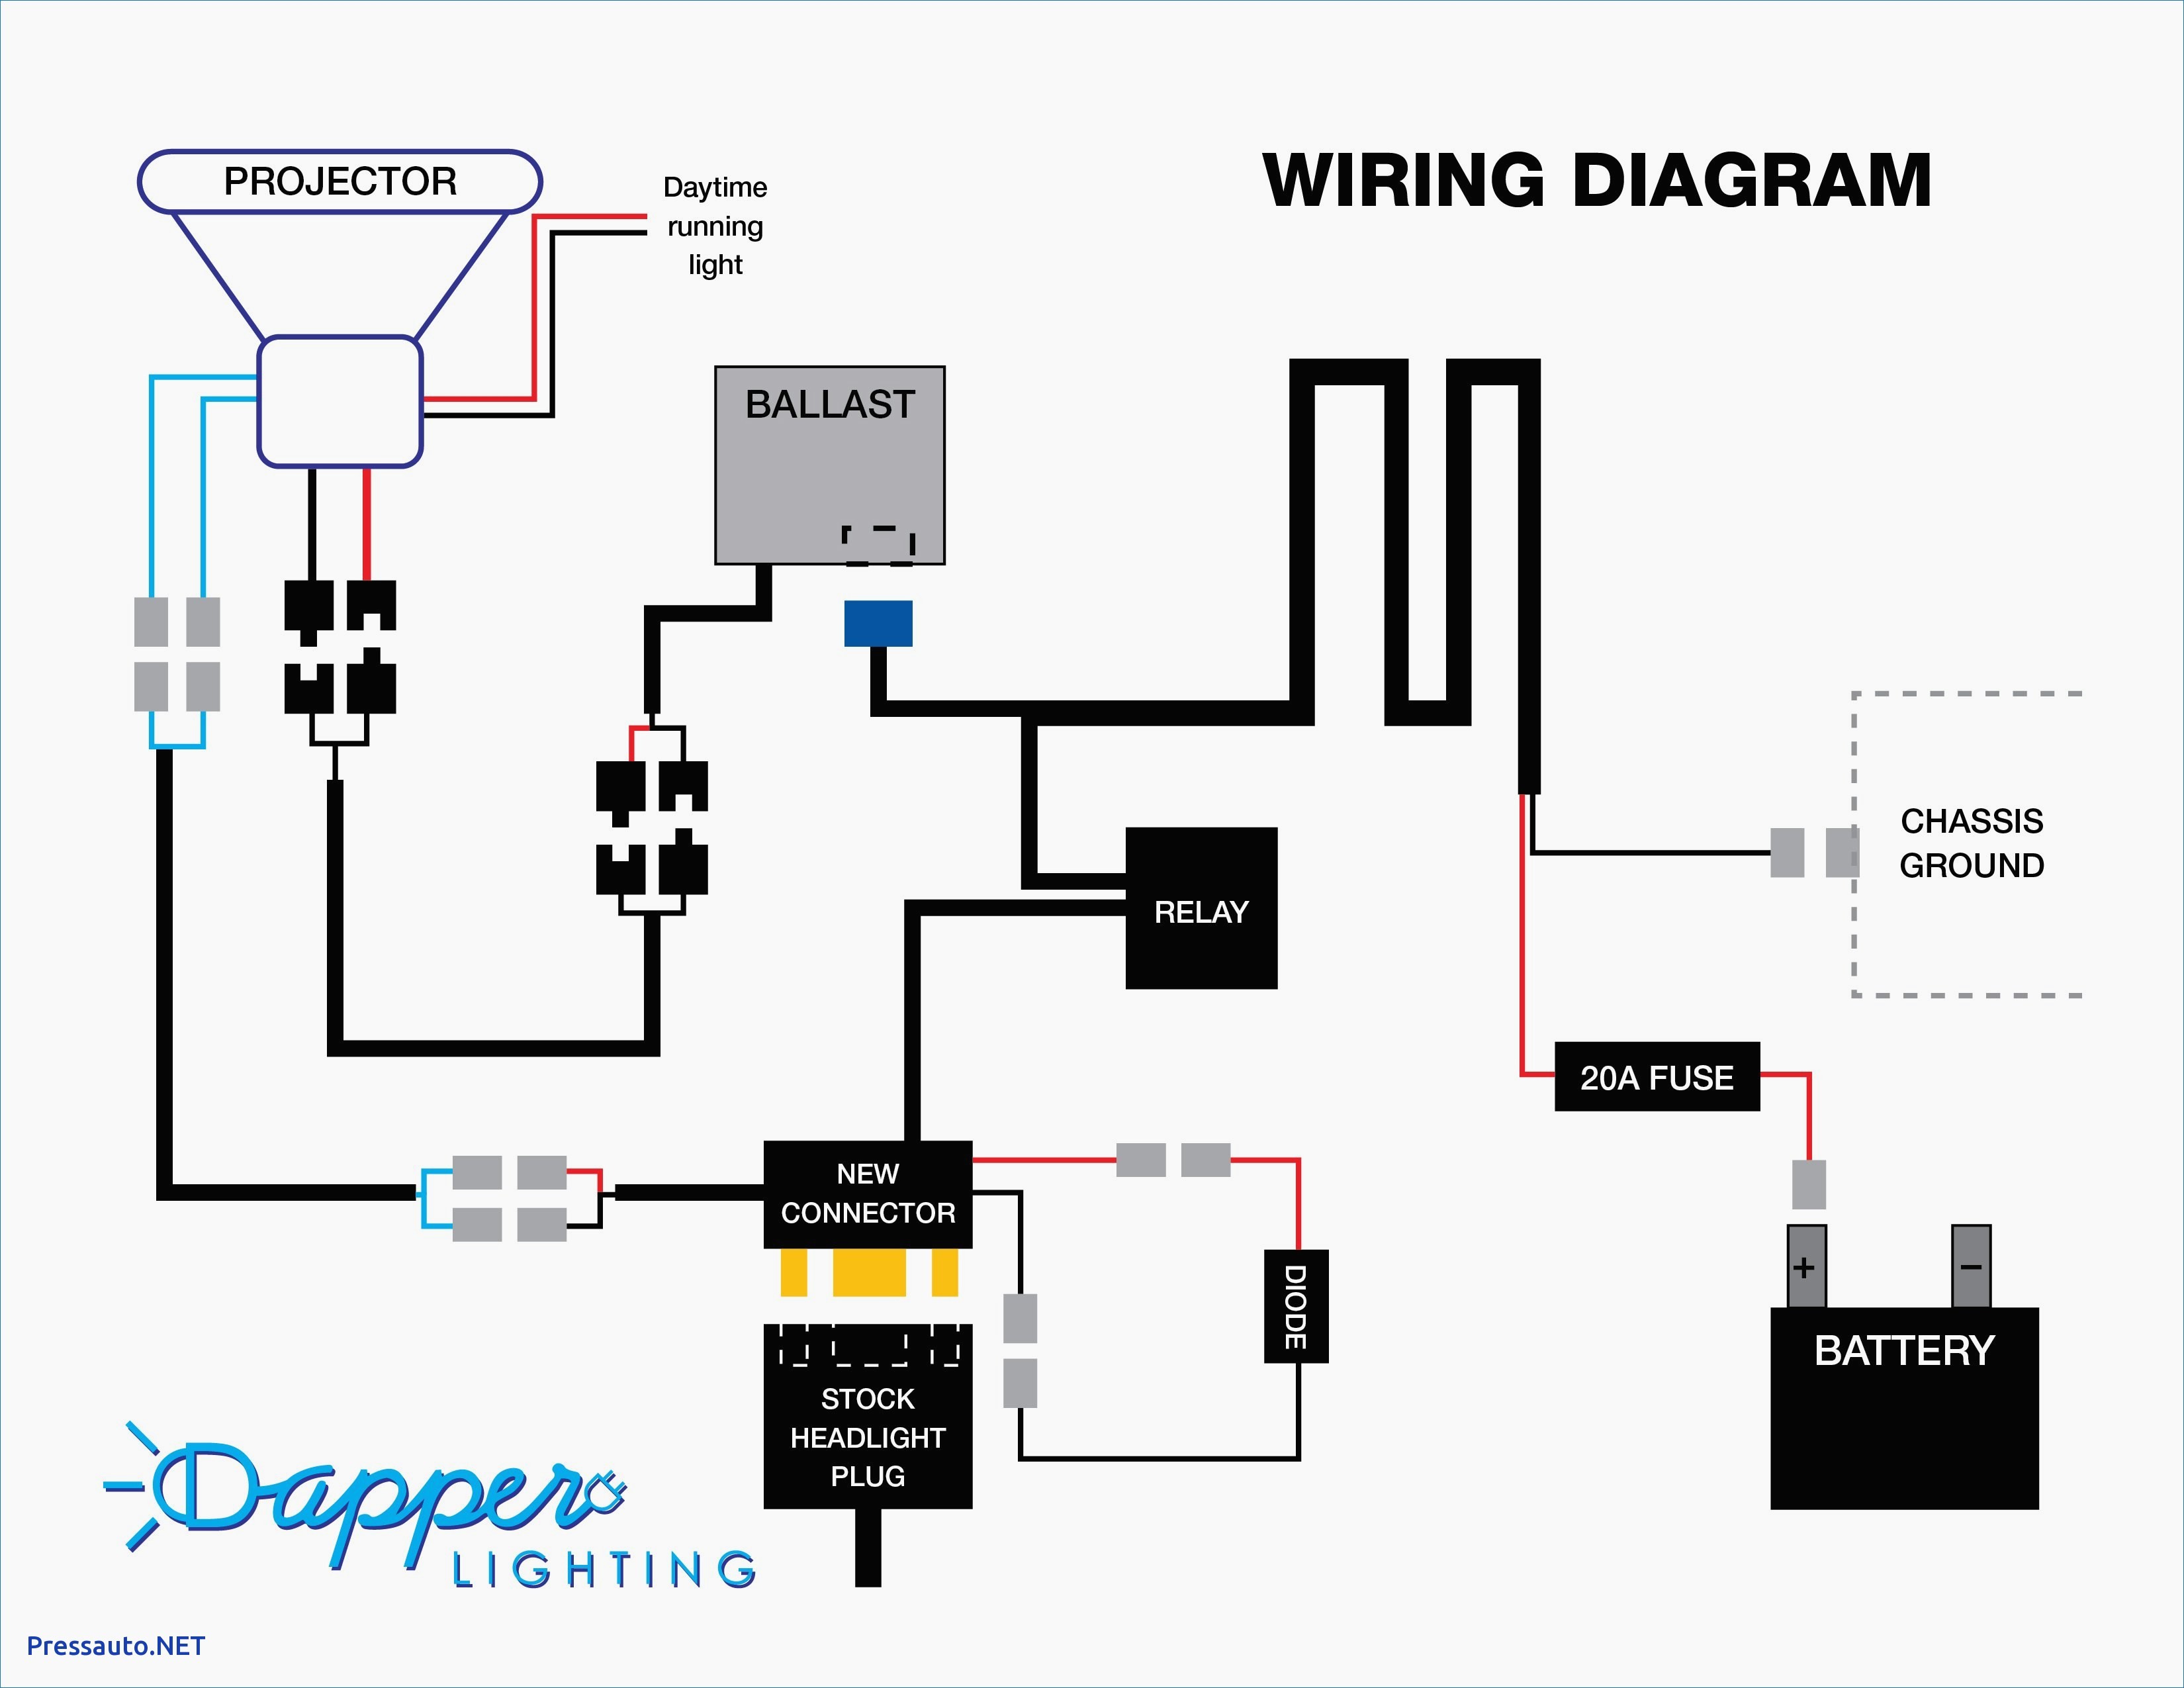 Wiring Diagram for Rocker Switch Wiring Diagram Dimension Physical Layout Connections Dpst toggle Of Wiring Diagram for Rocker Switch